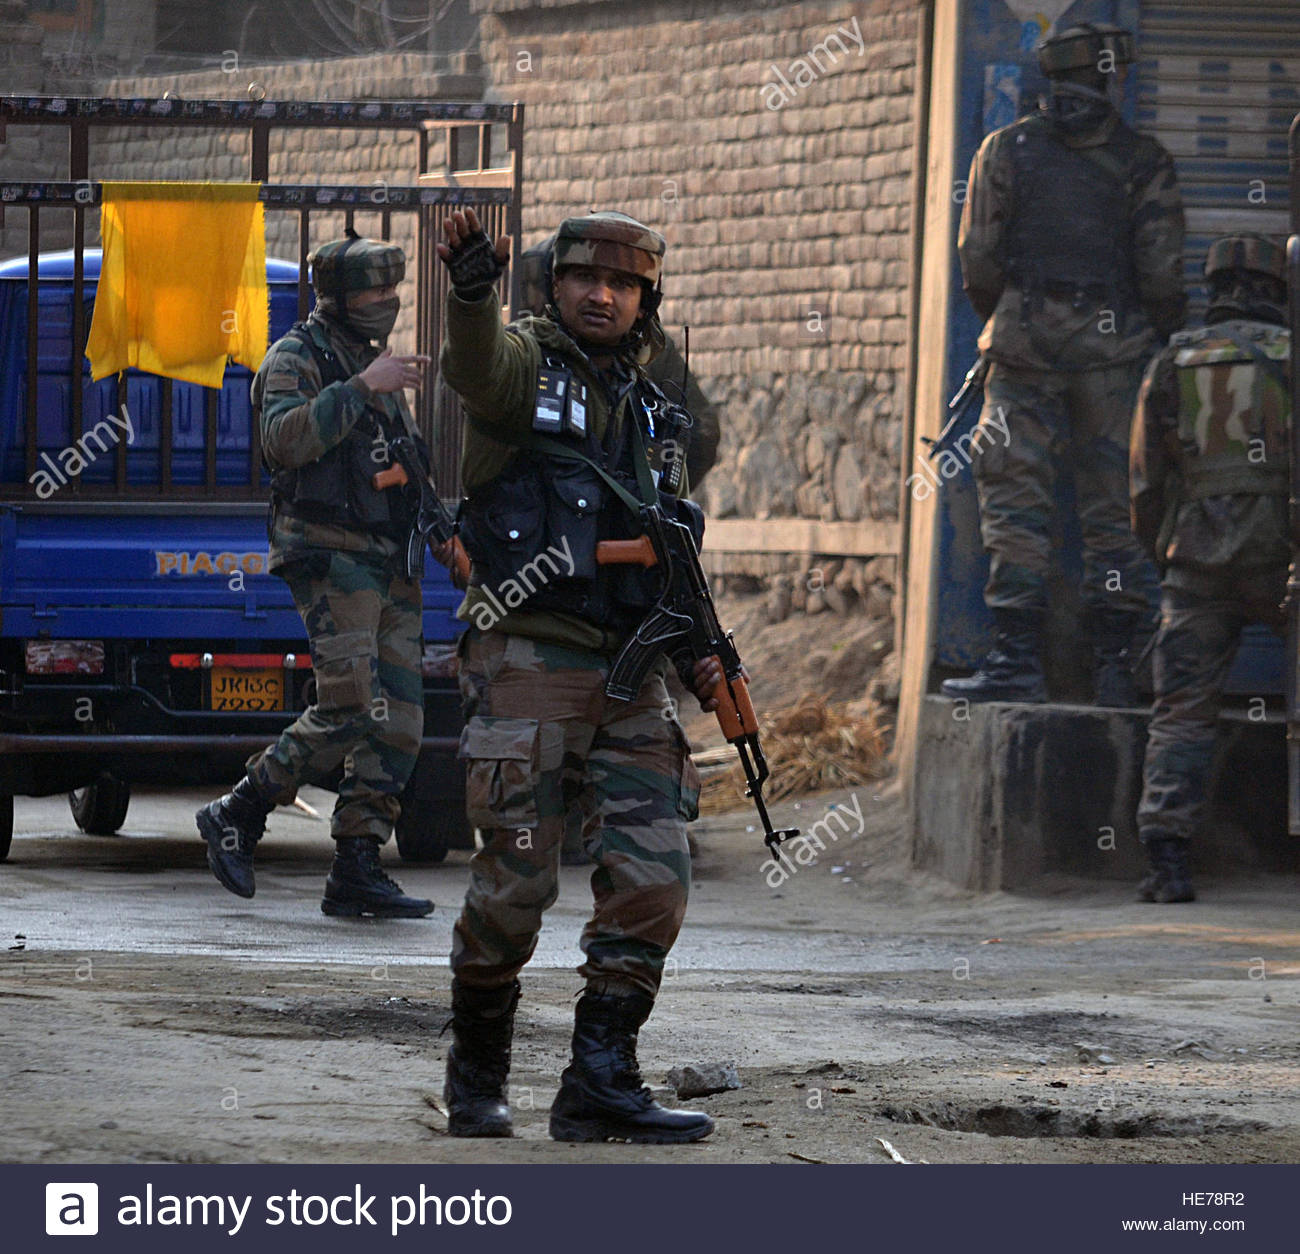 srinagar-india-17th-dec-2016-an-indian-army-soldier-stops-the-journalists-HE78R2.jpg